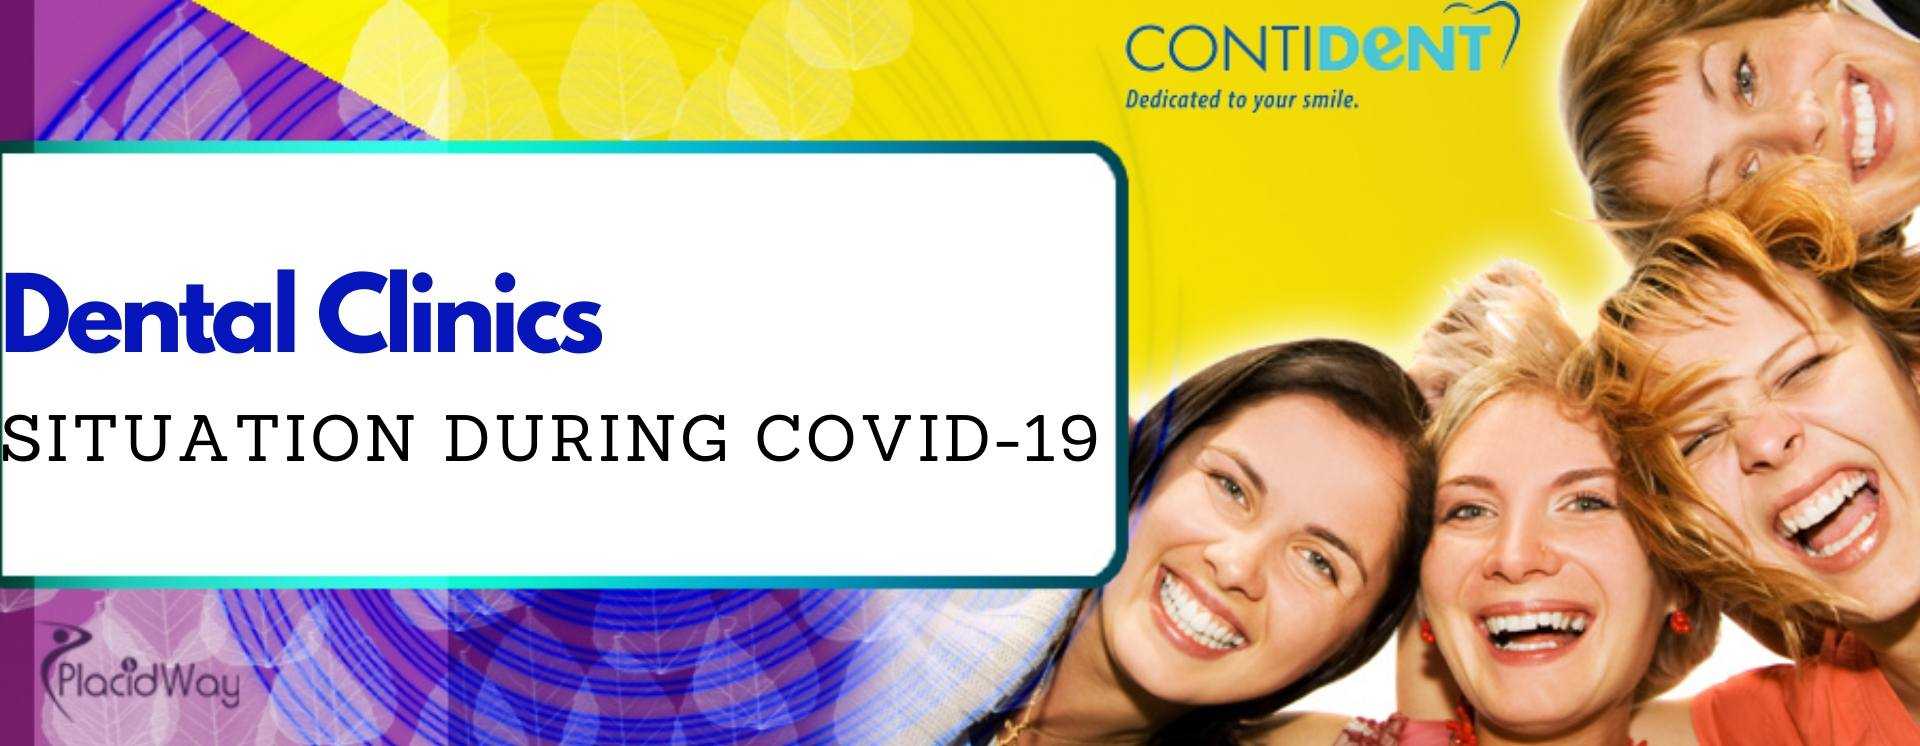 Dental Care during COVID-19